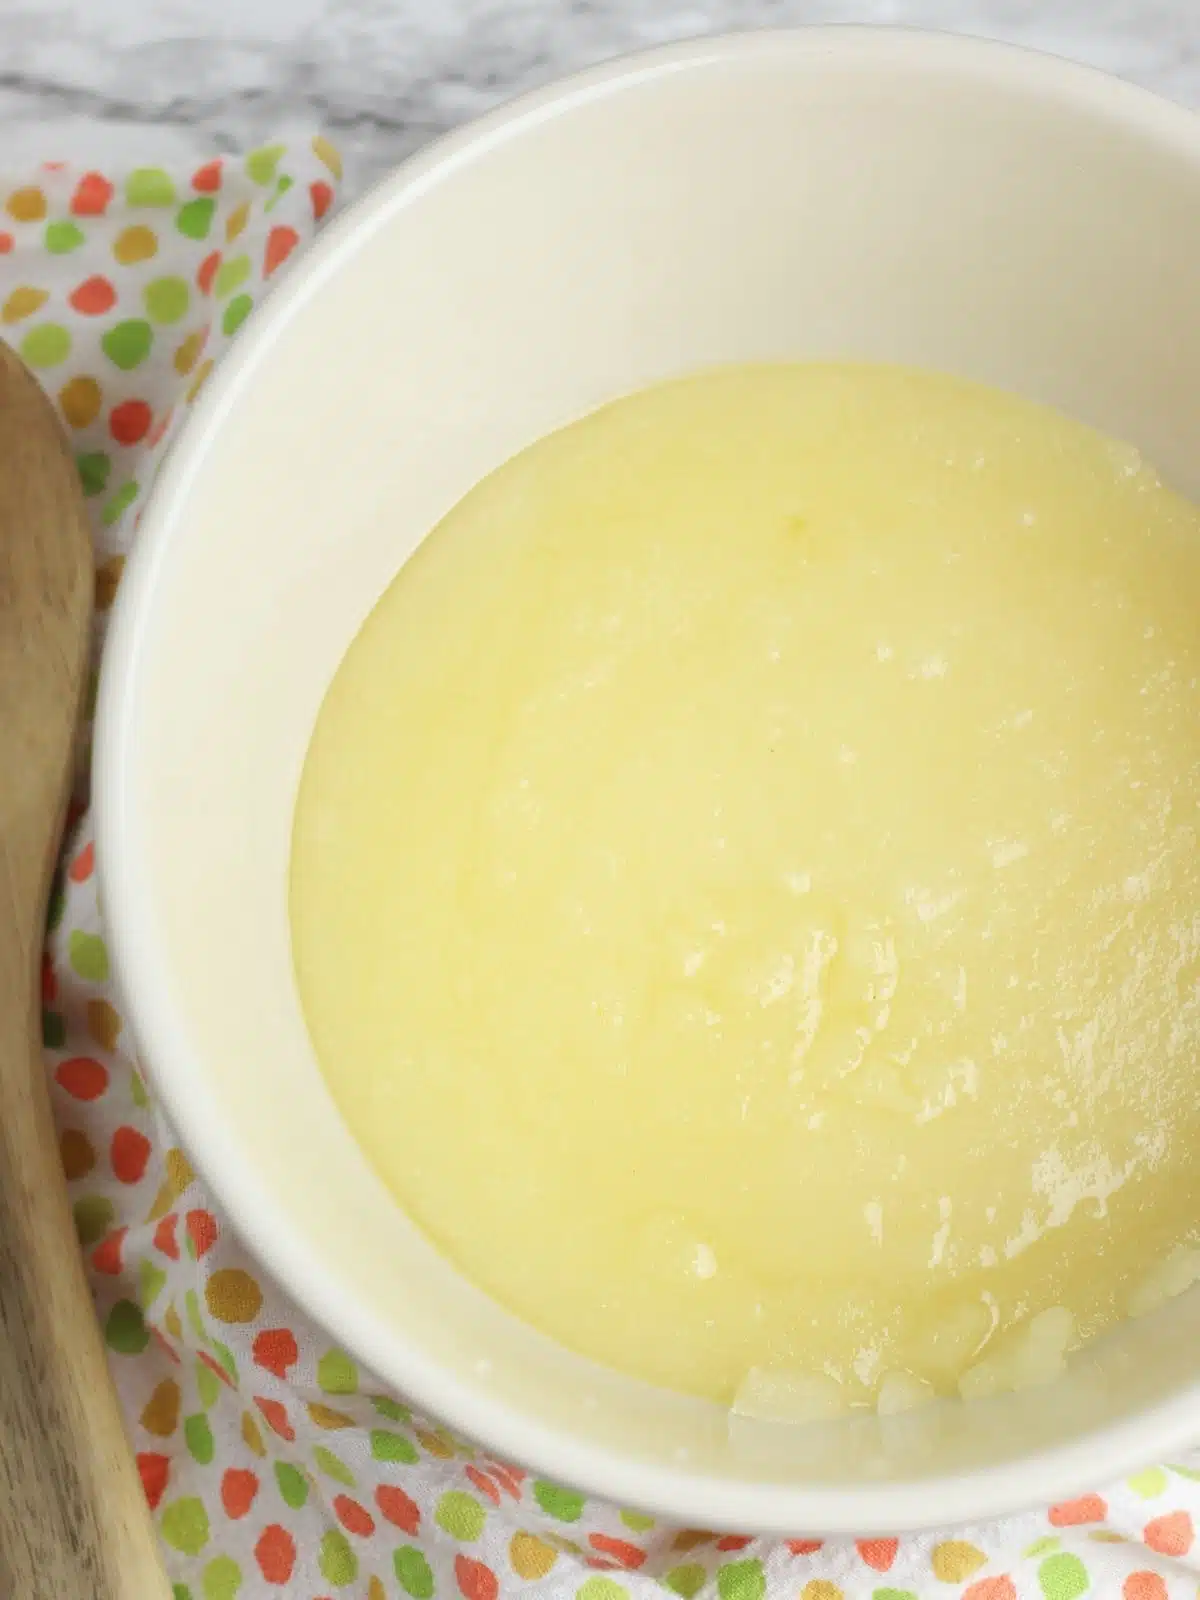 metled butter in white bowl.